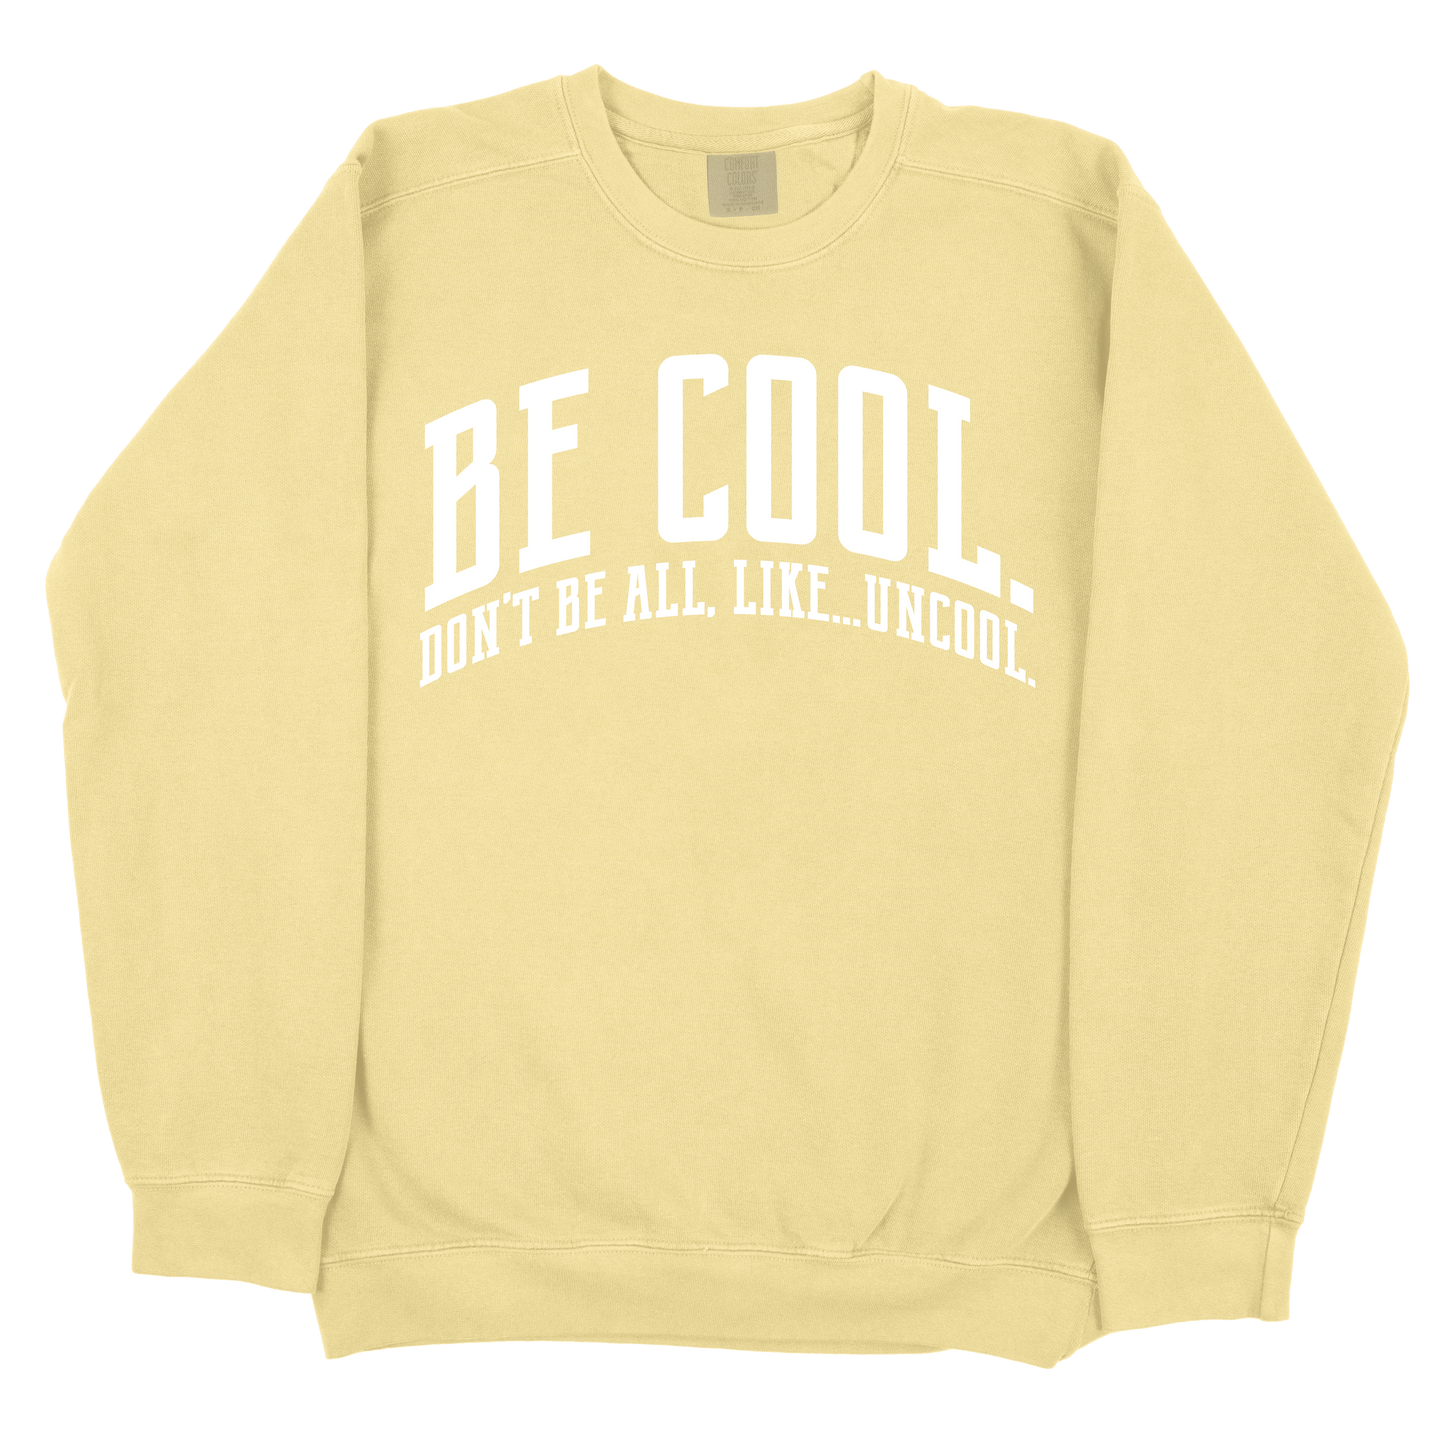 Be Cool. Don't Be All, Like...Uncool CC Sweatshirt - Butter